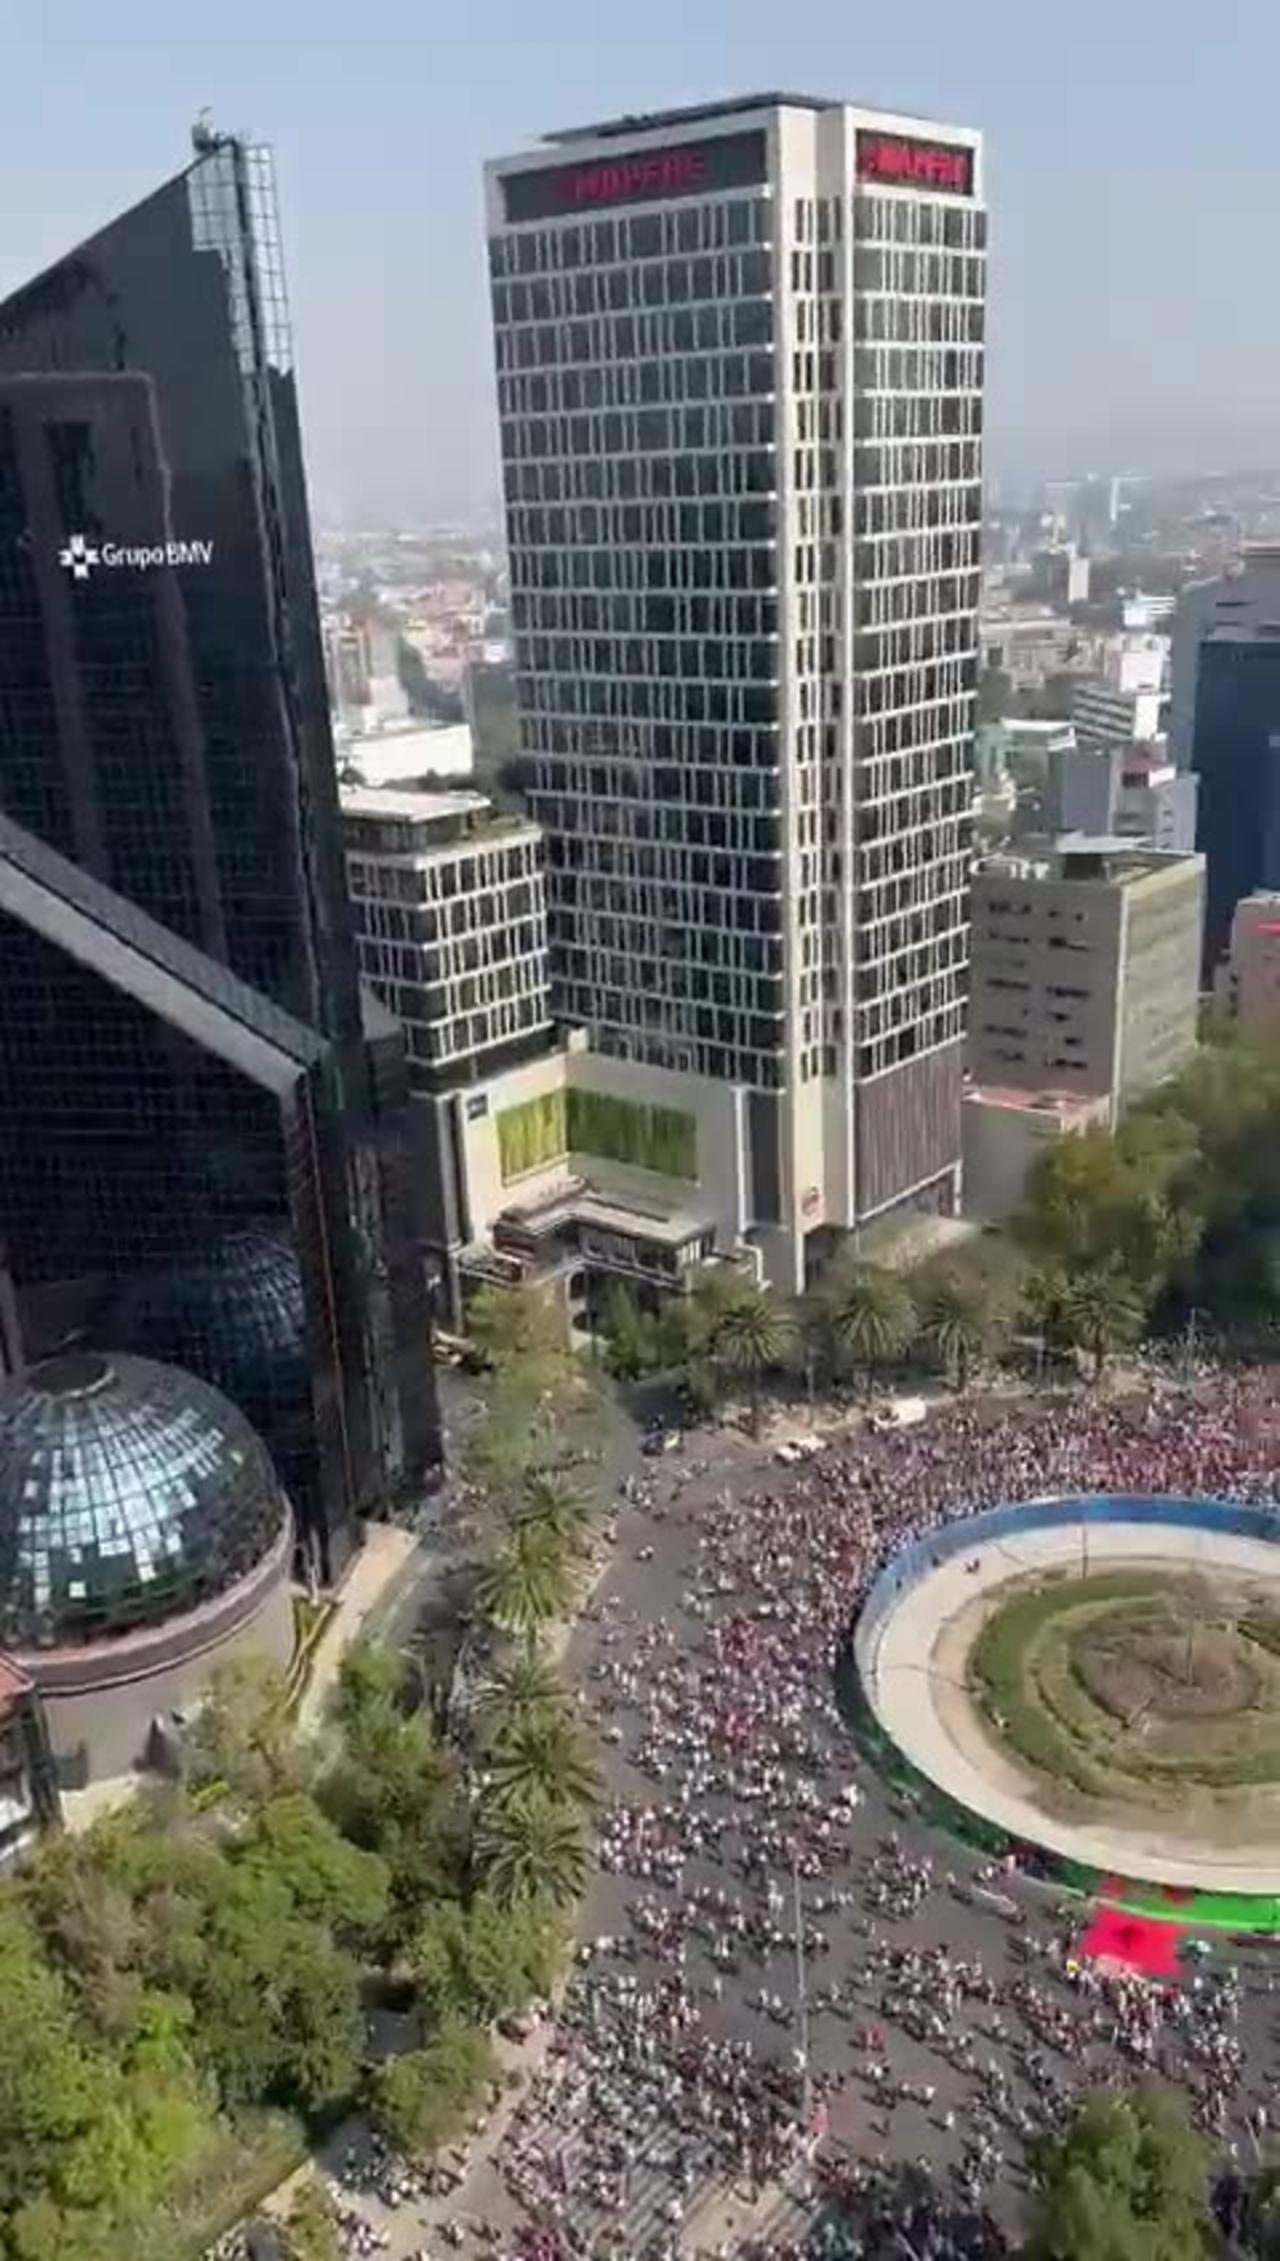 Massive protest in Mexico against the Mexican president's electoral reform plan.